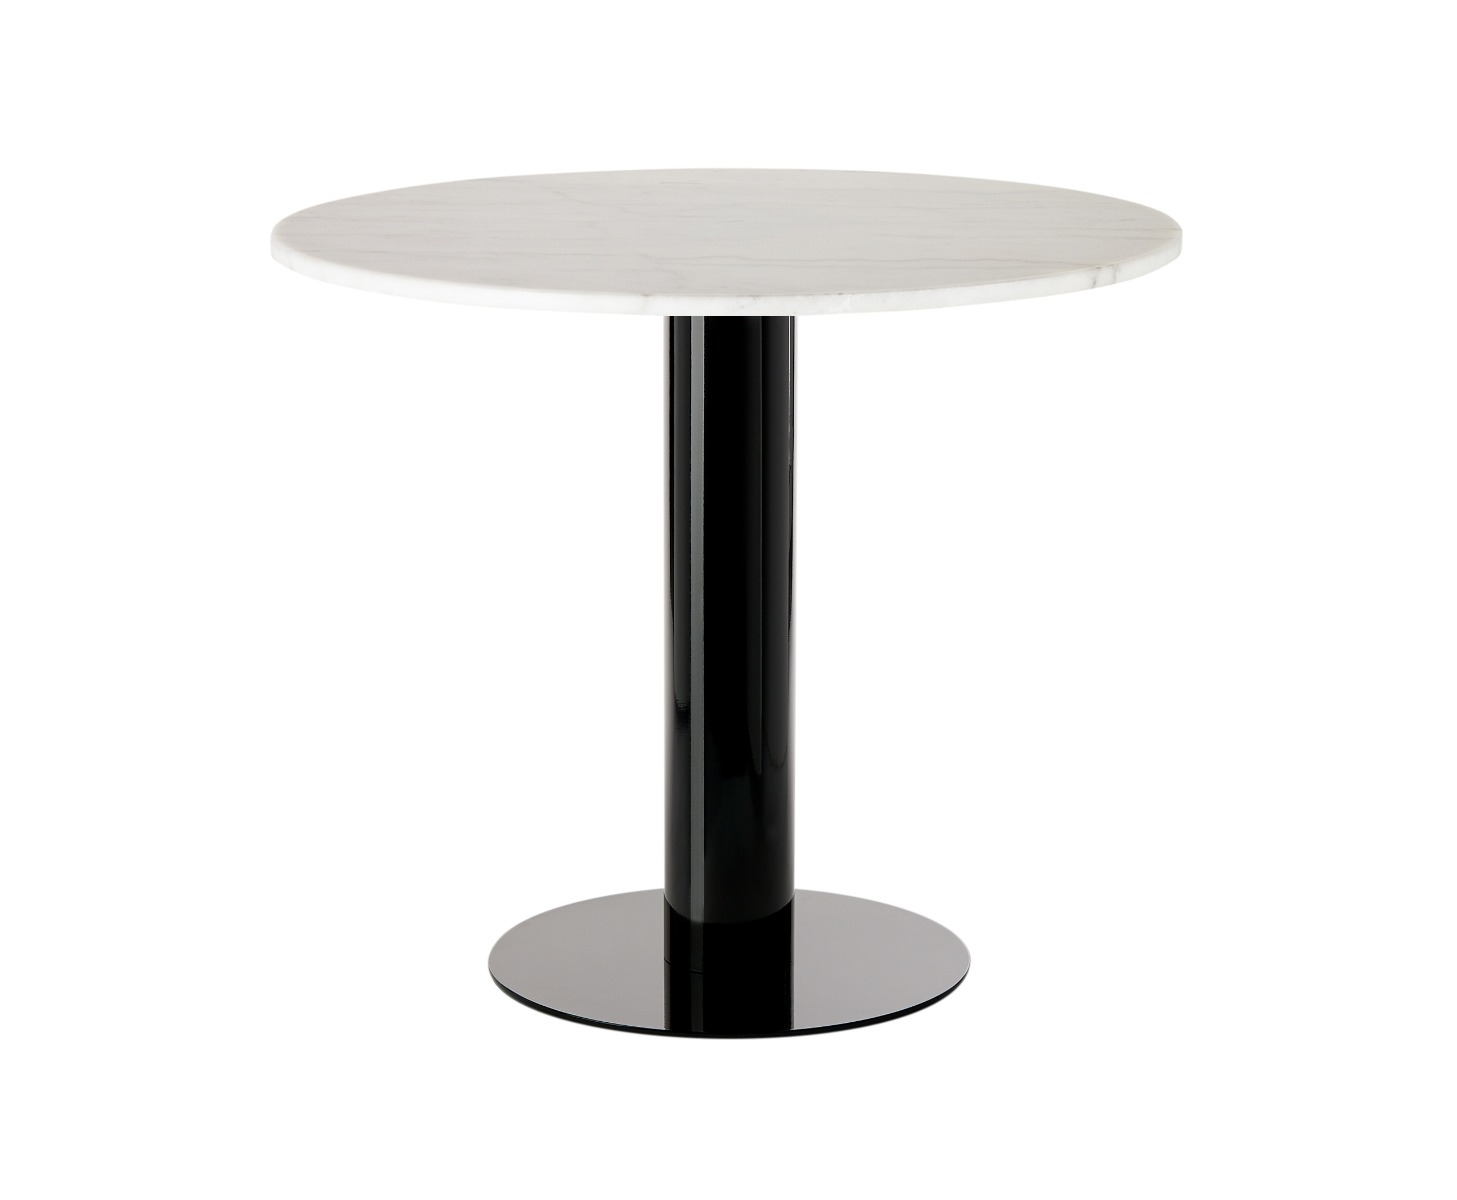 Tom Dixon - Tube High Table White Marble Top 900mm